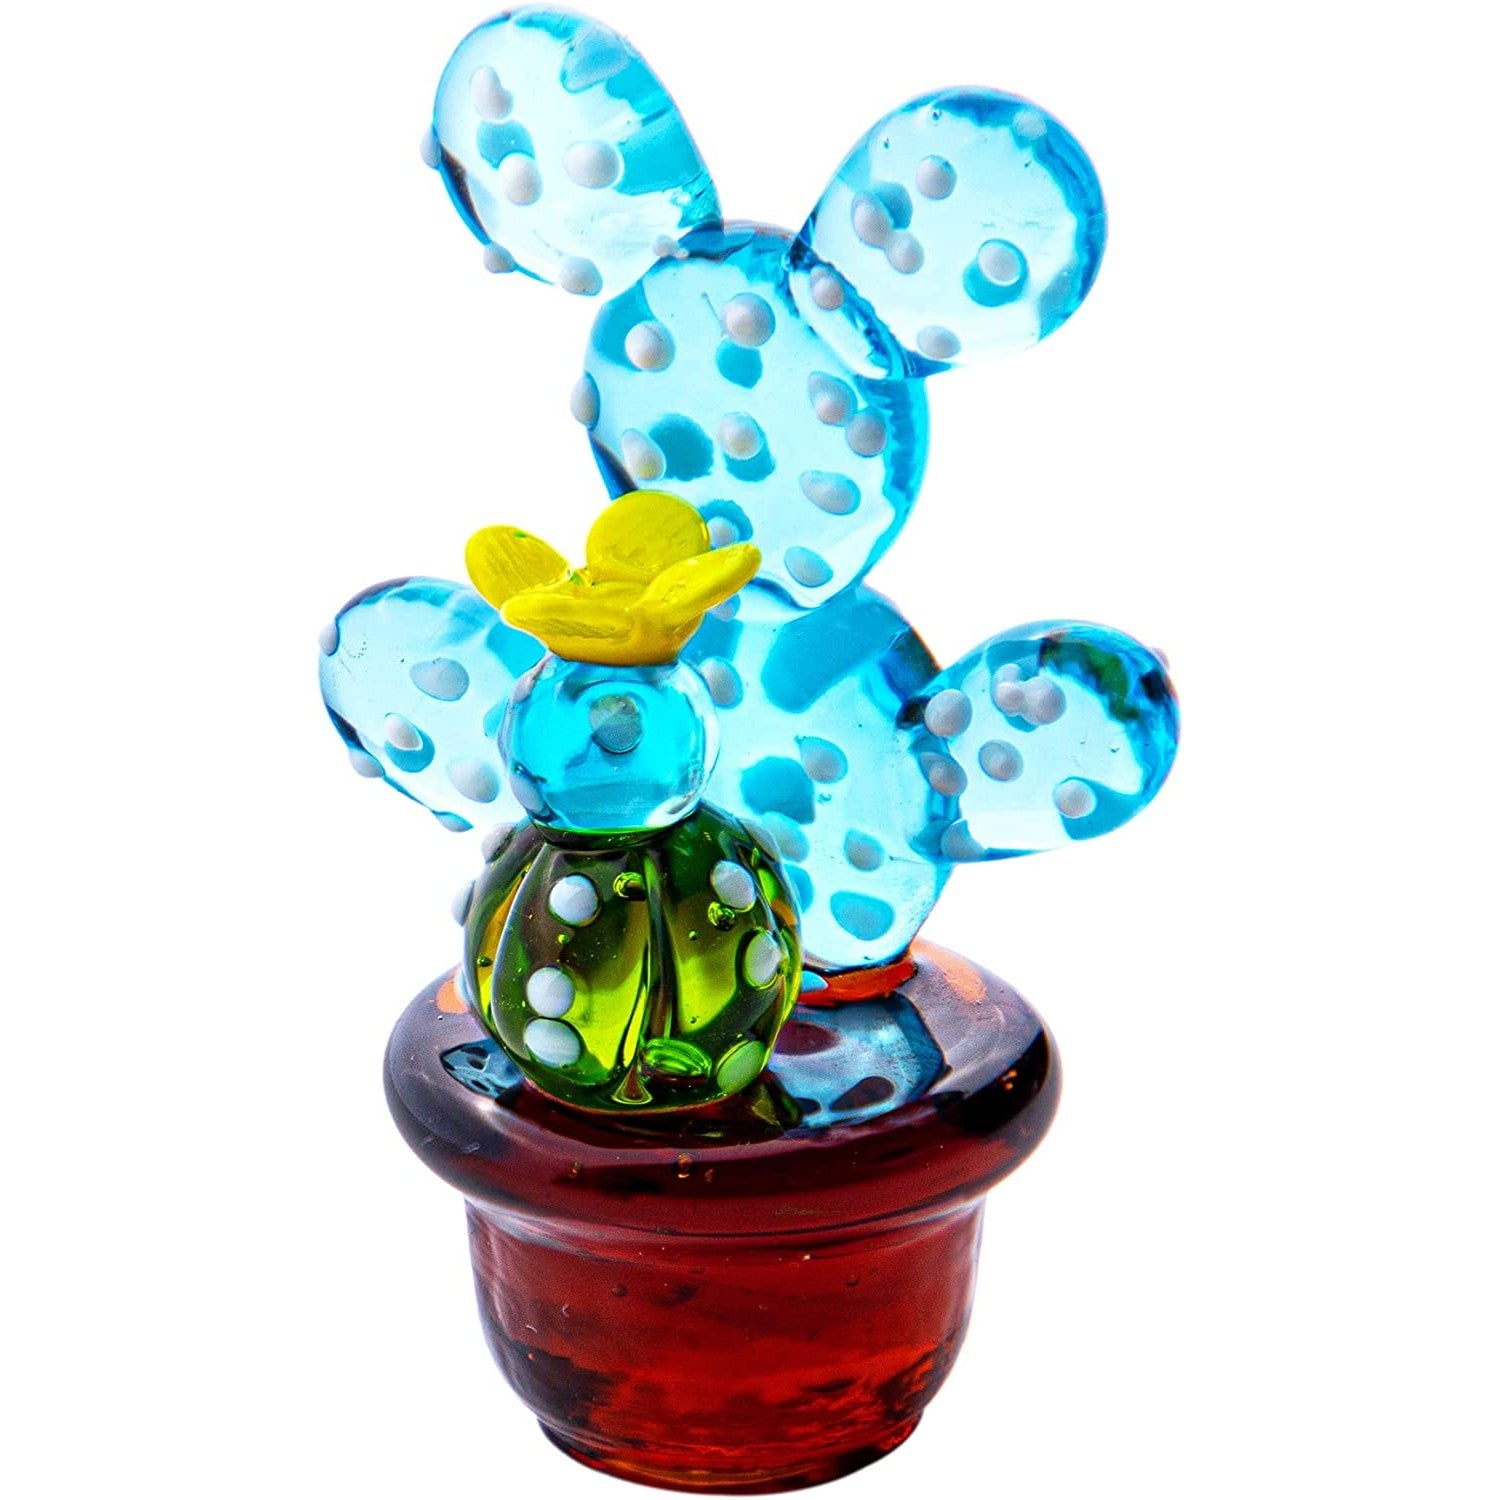 A blue and brown colored cactus figurine made of hand blown glass.